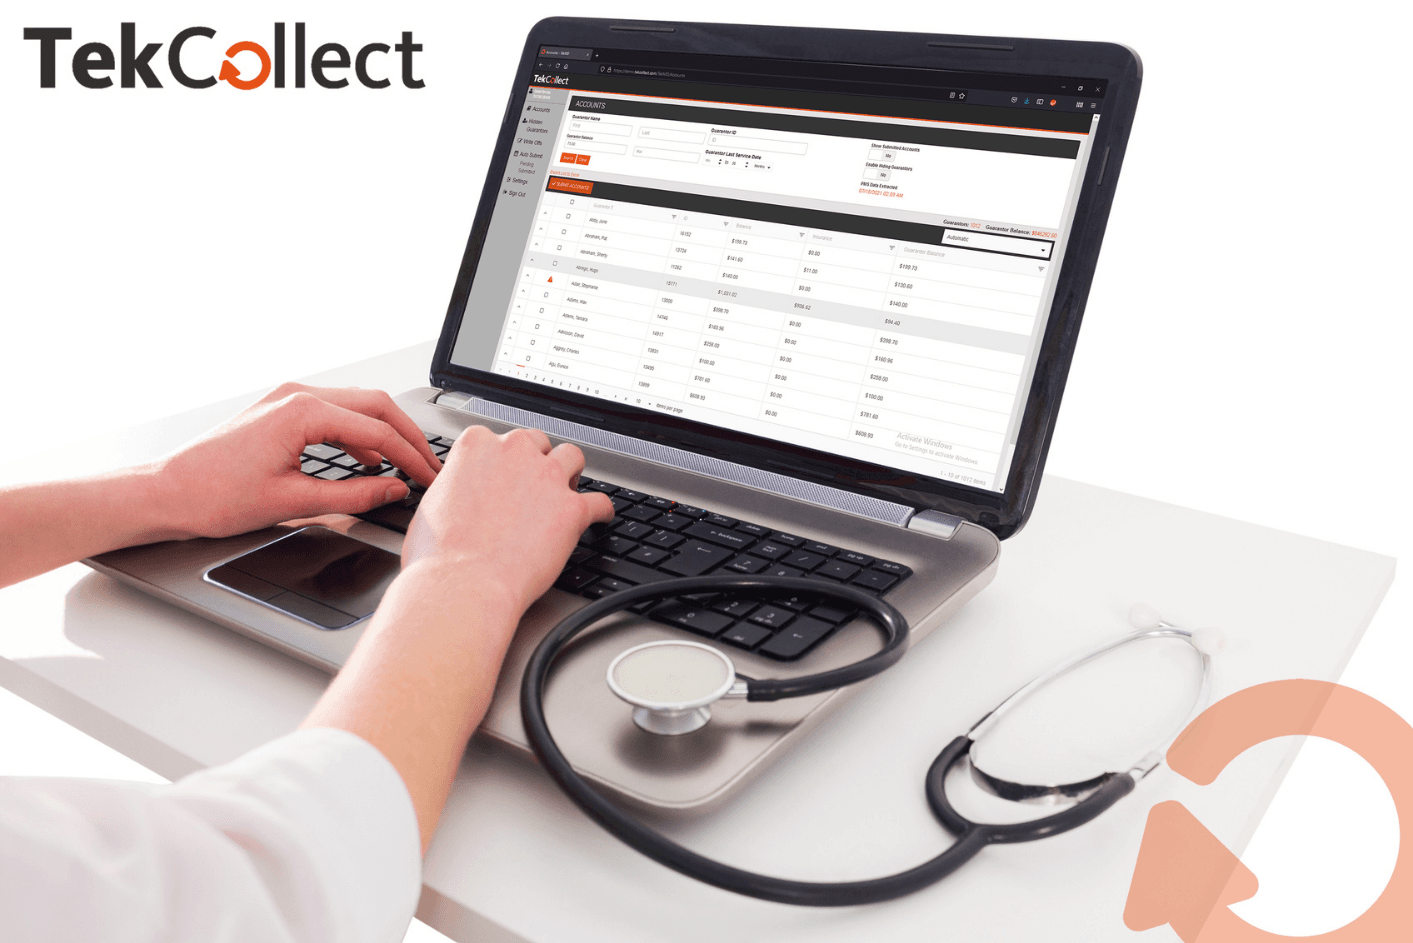 TekCollect software product